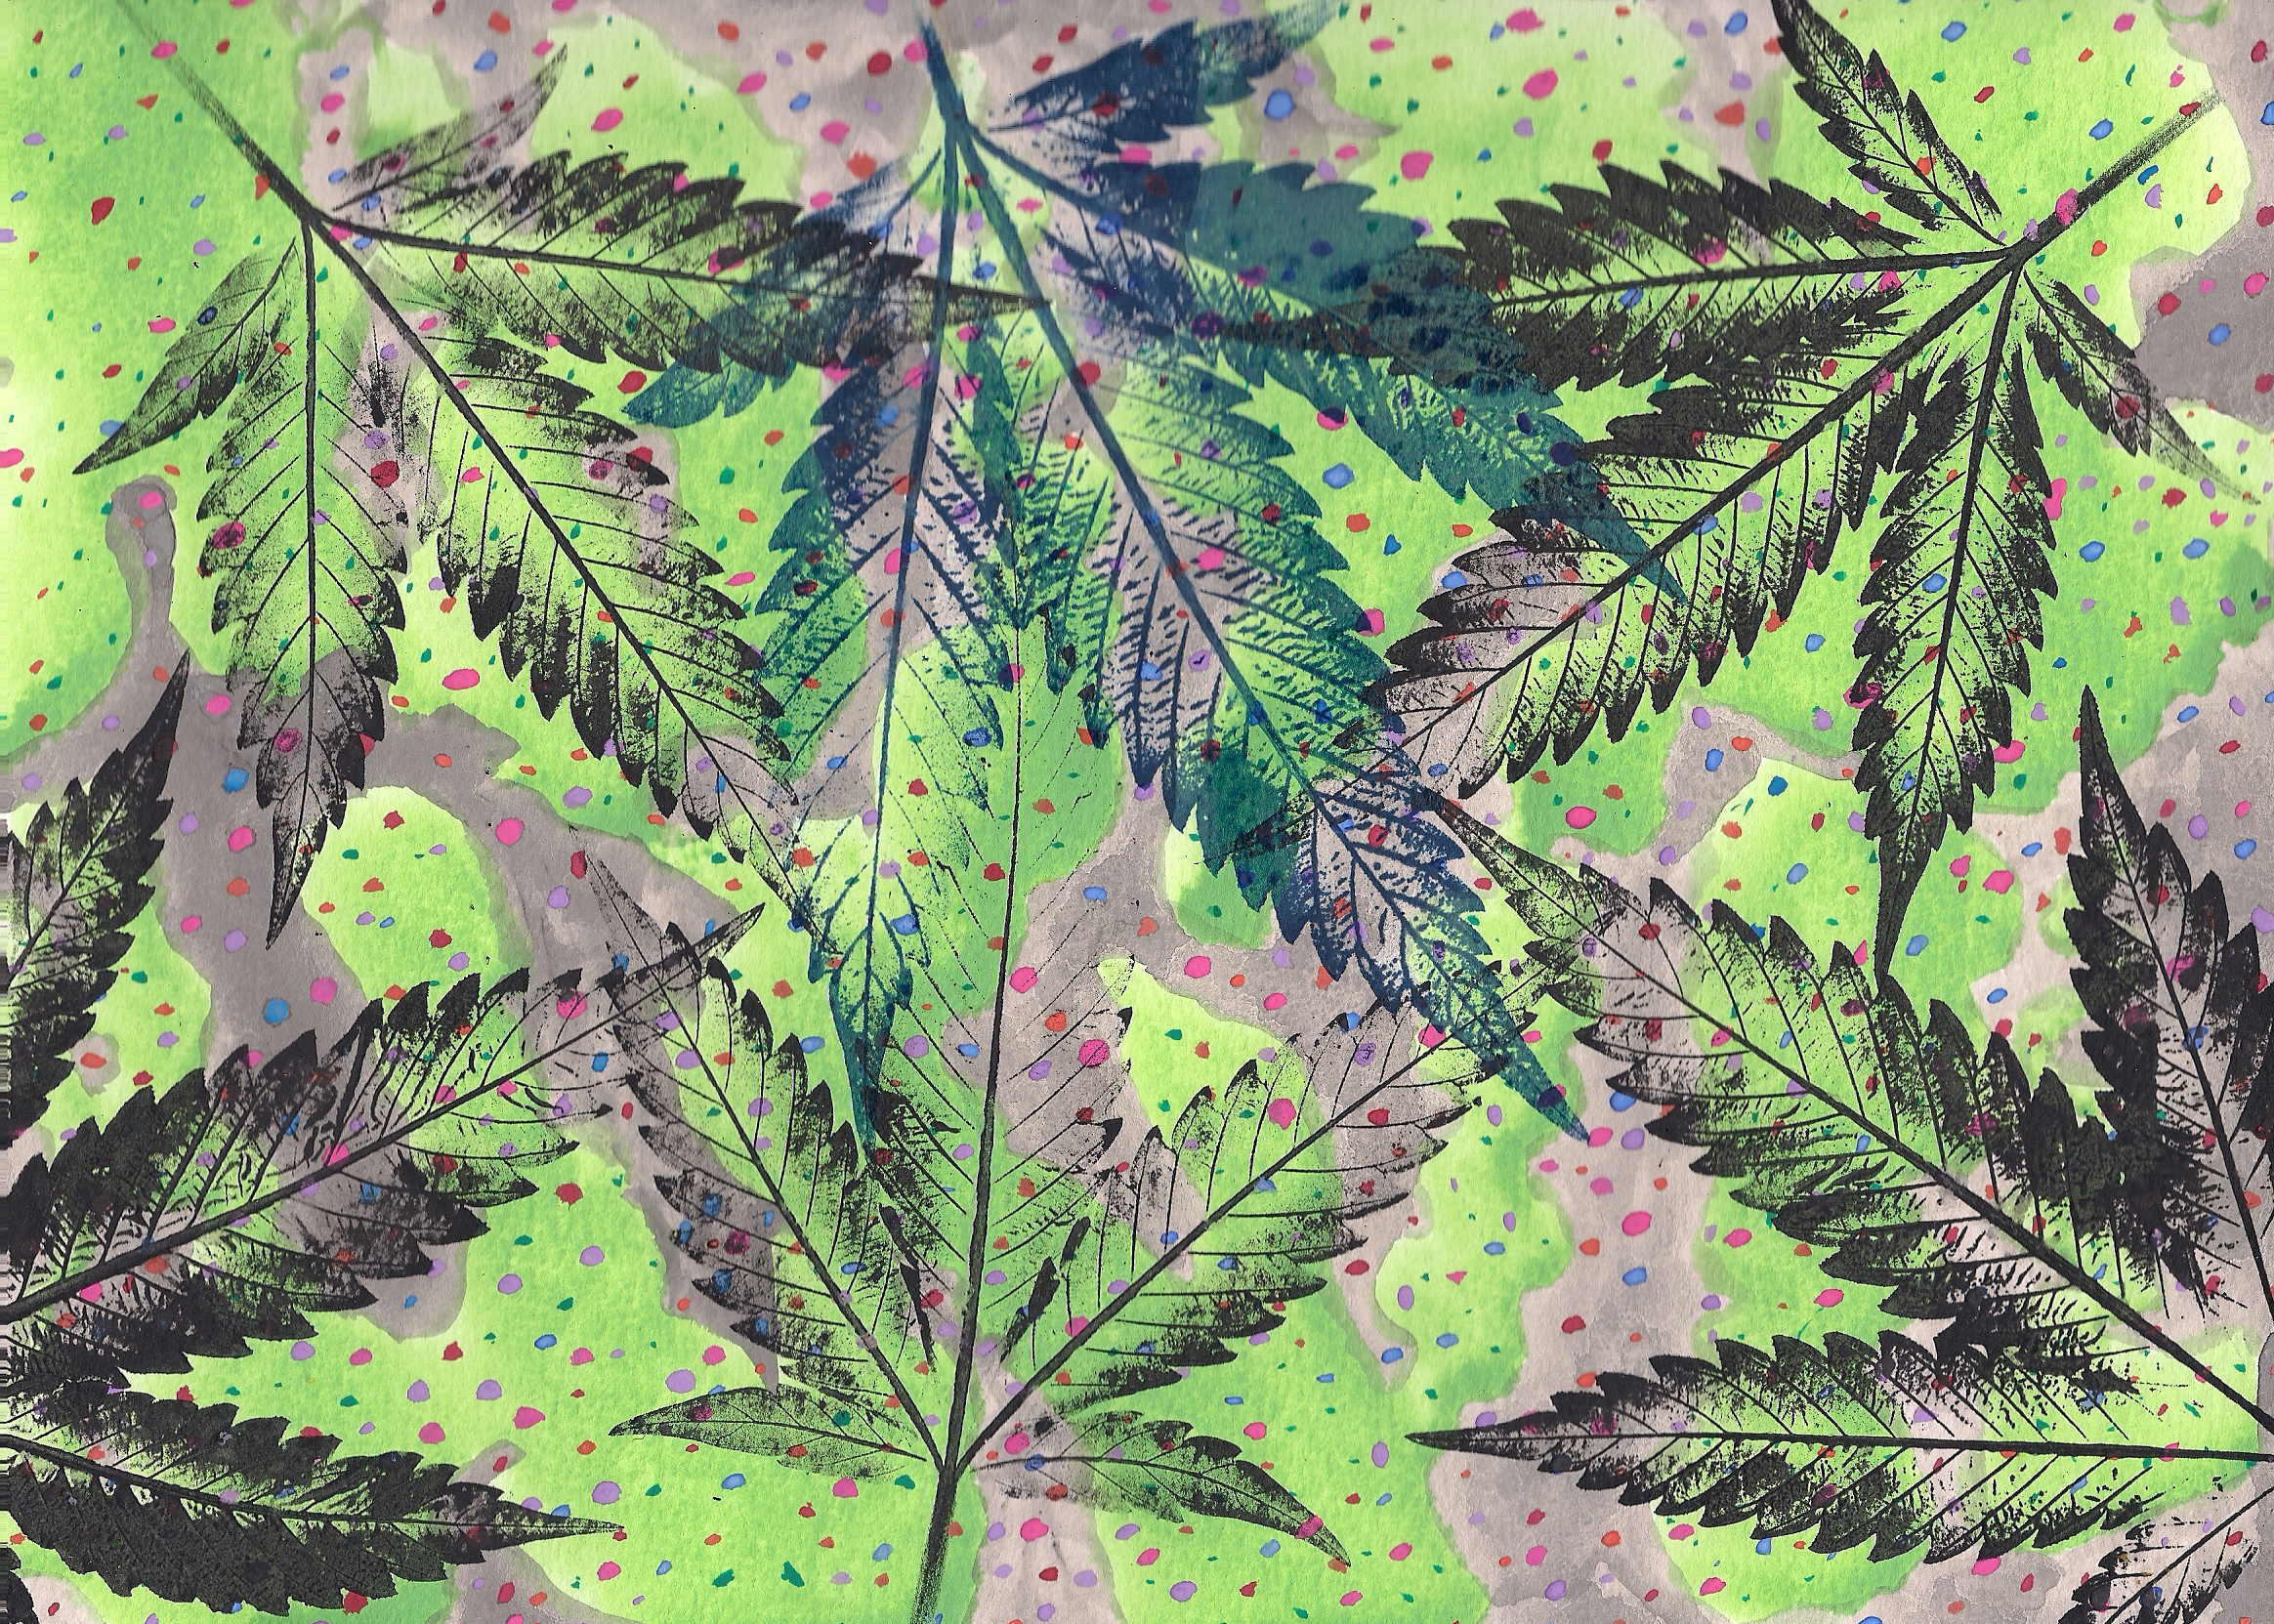 A watercolor painting with imprints of cannabis leaves over green and purple patches.